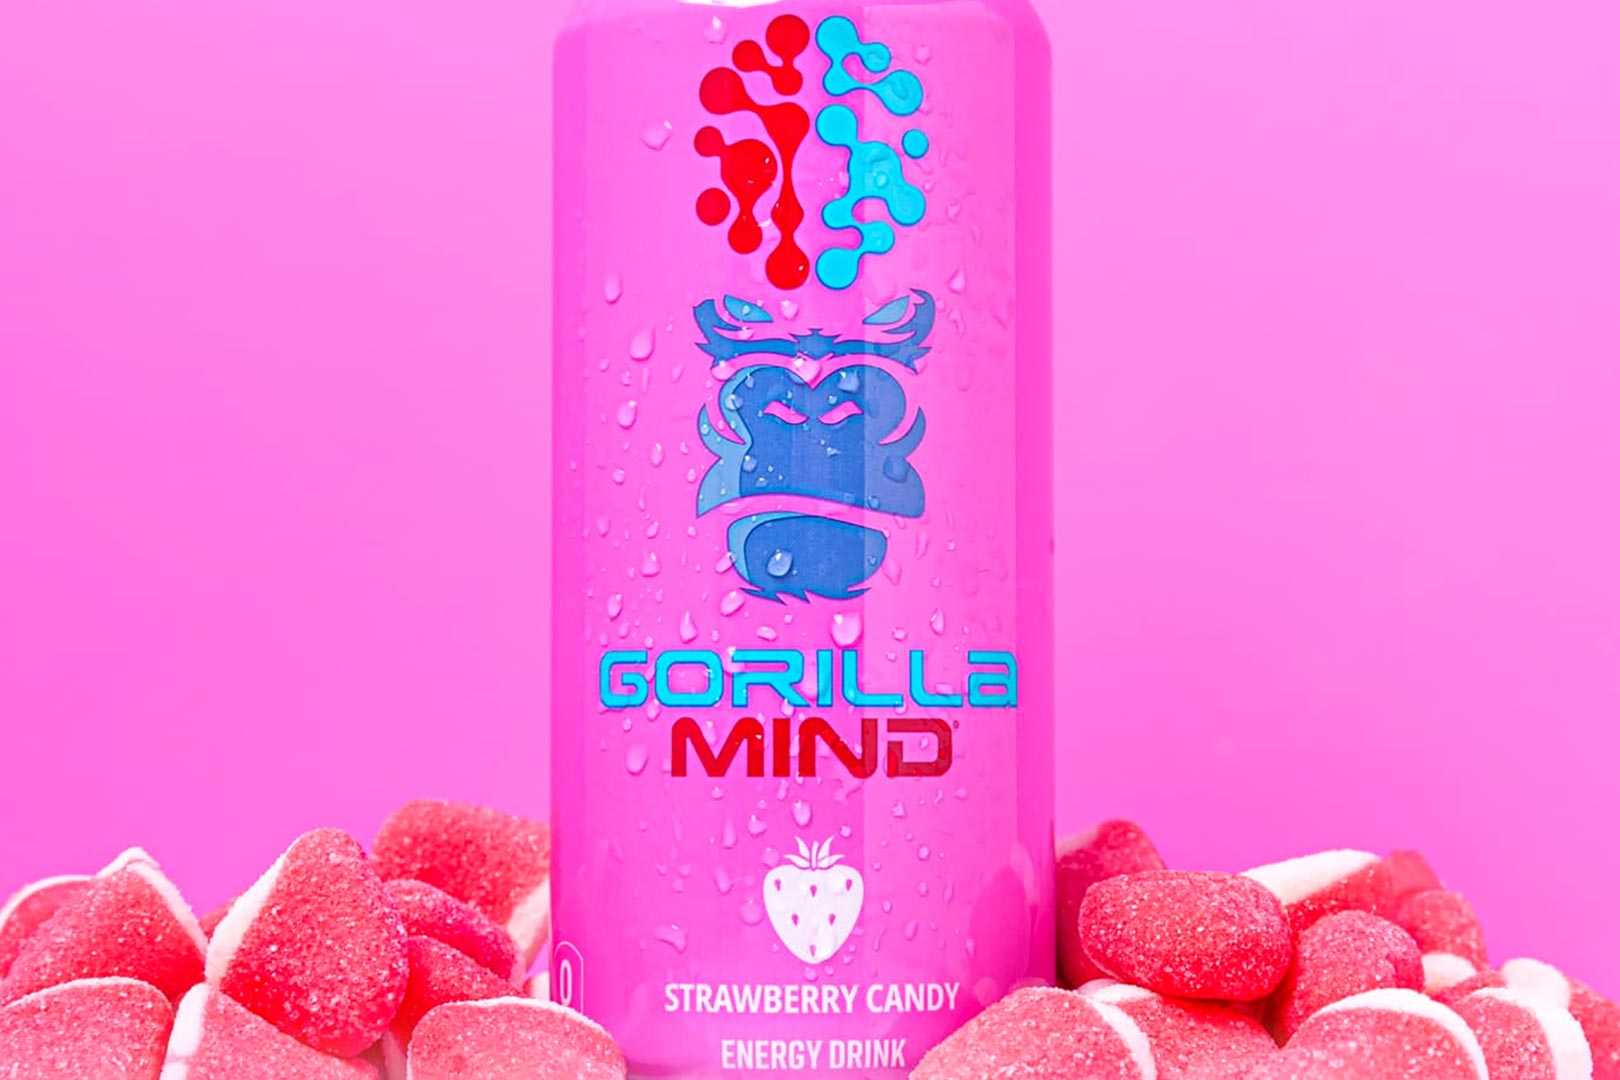 Where To Buy Strawberry Candy Gorilla Mind Energy